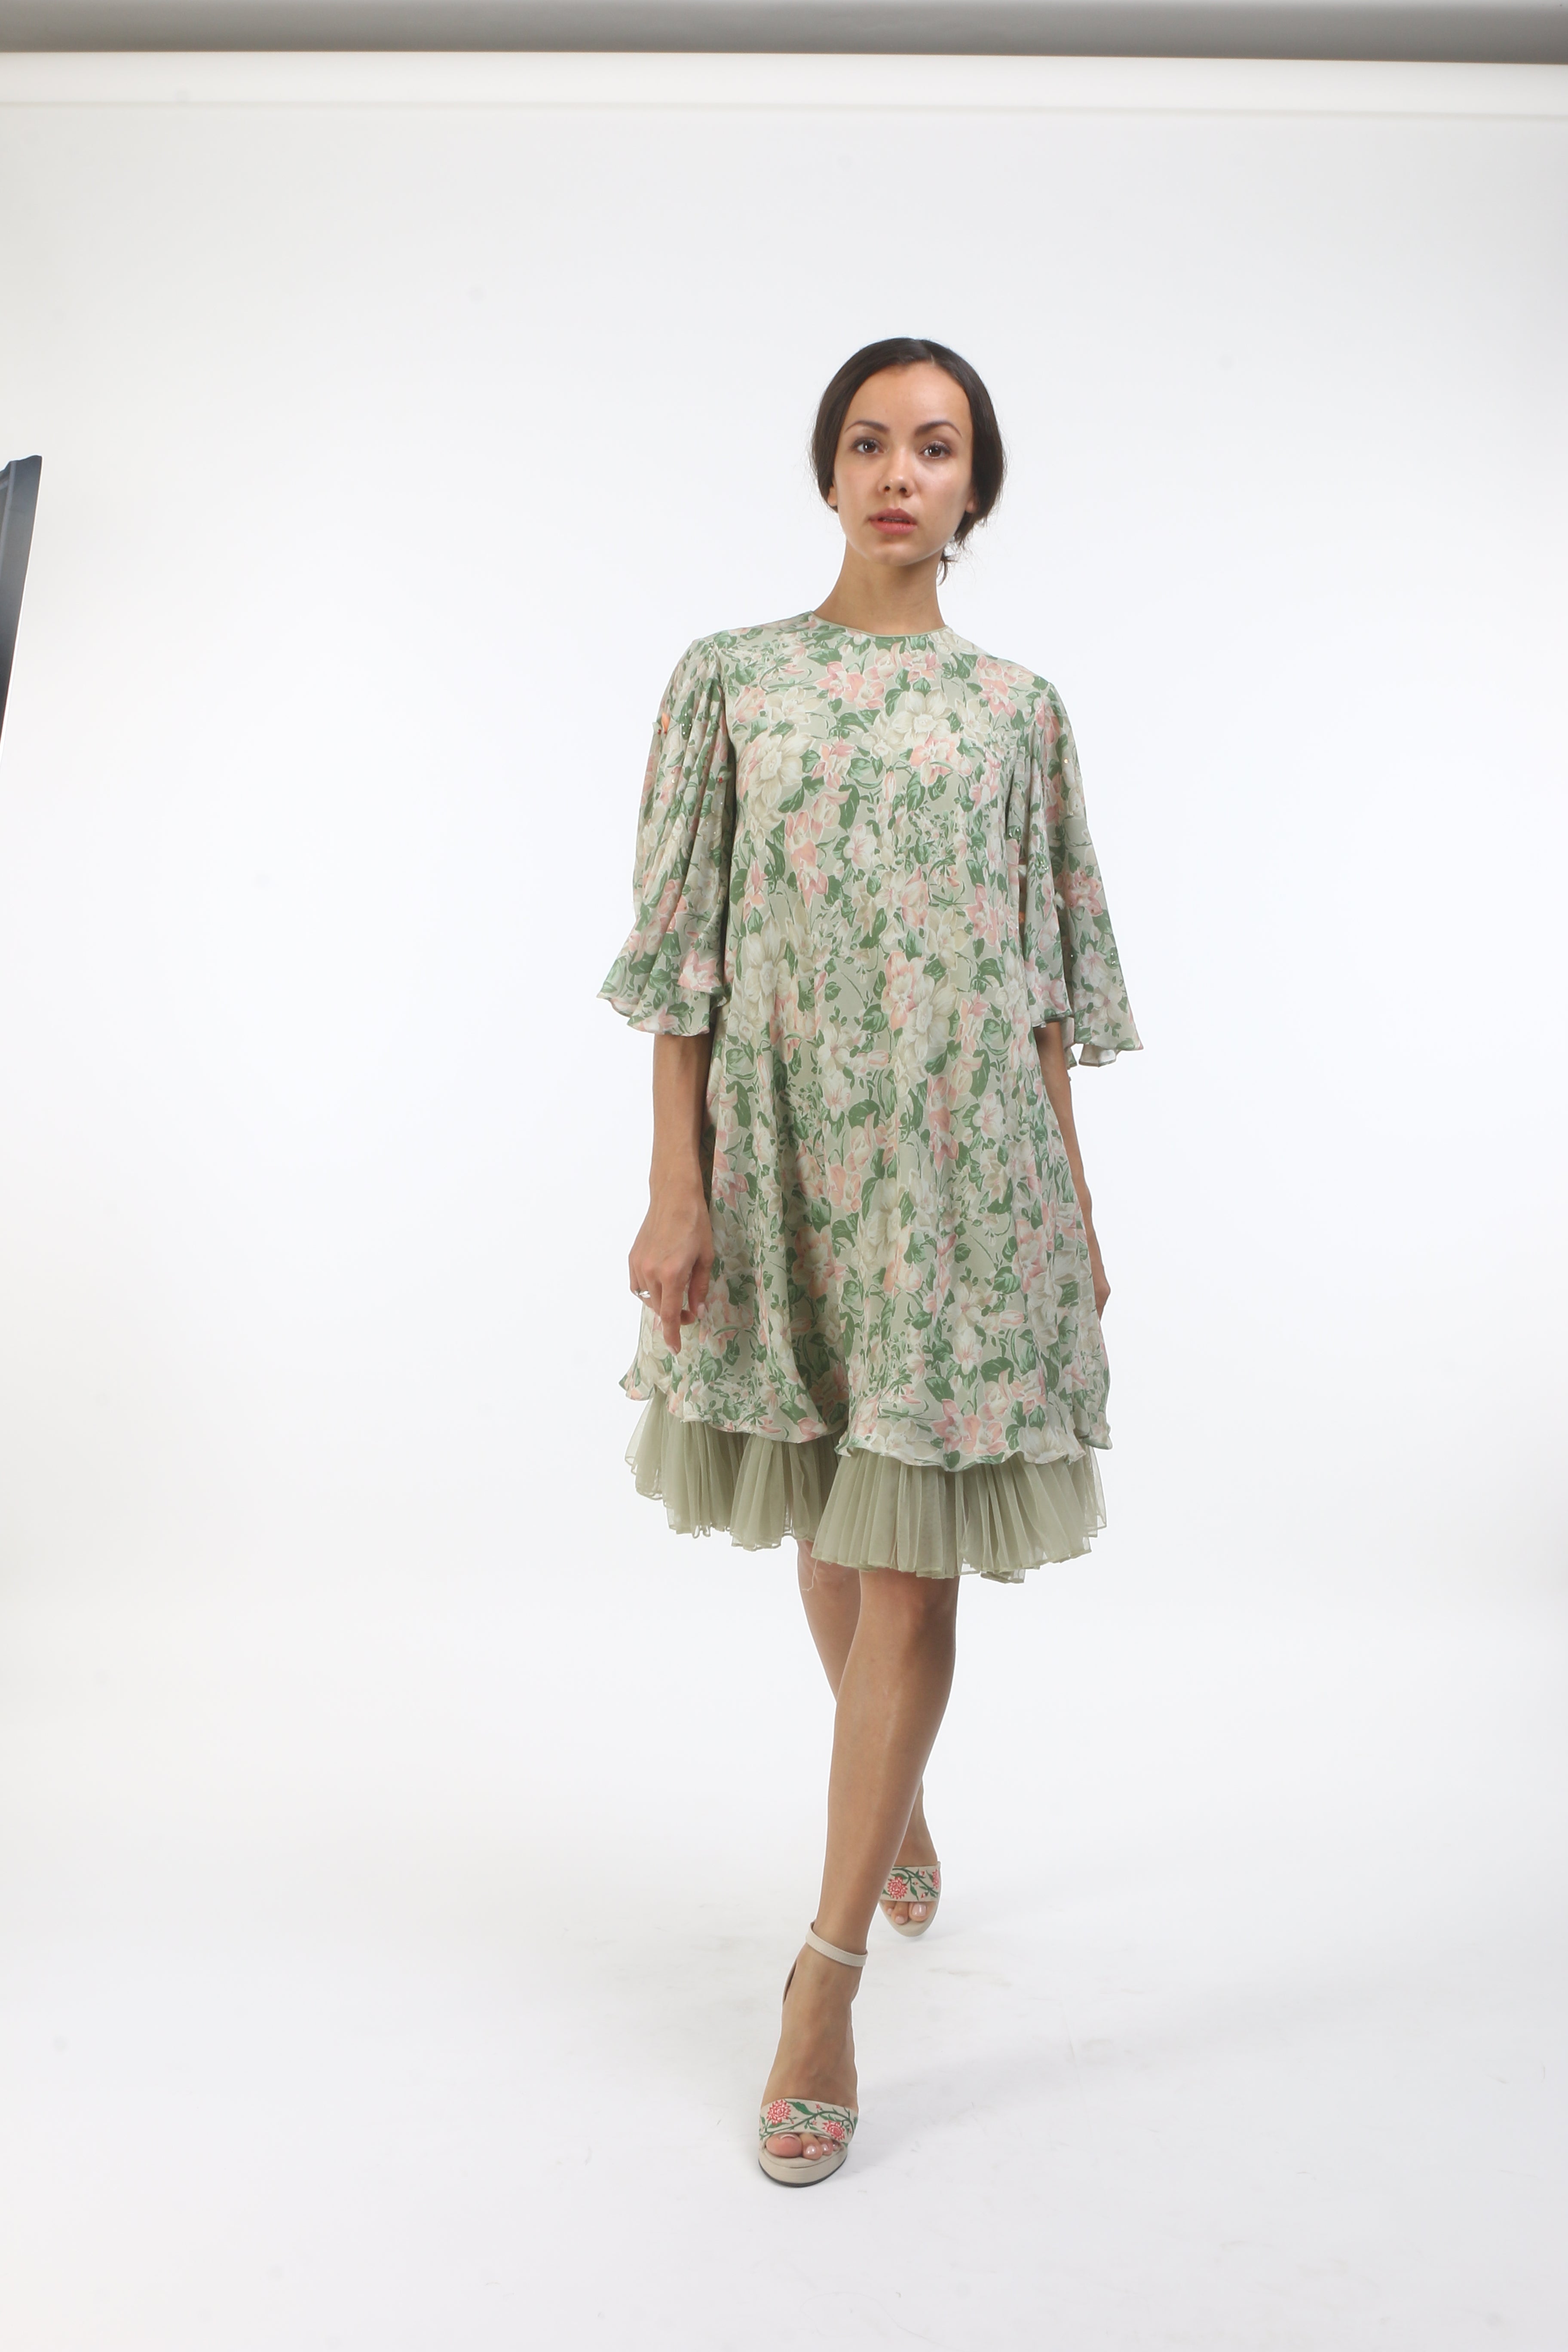 Bloom antique jade bibi jaal printed butterfly dress in crepe with tulle gathers.